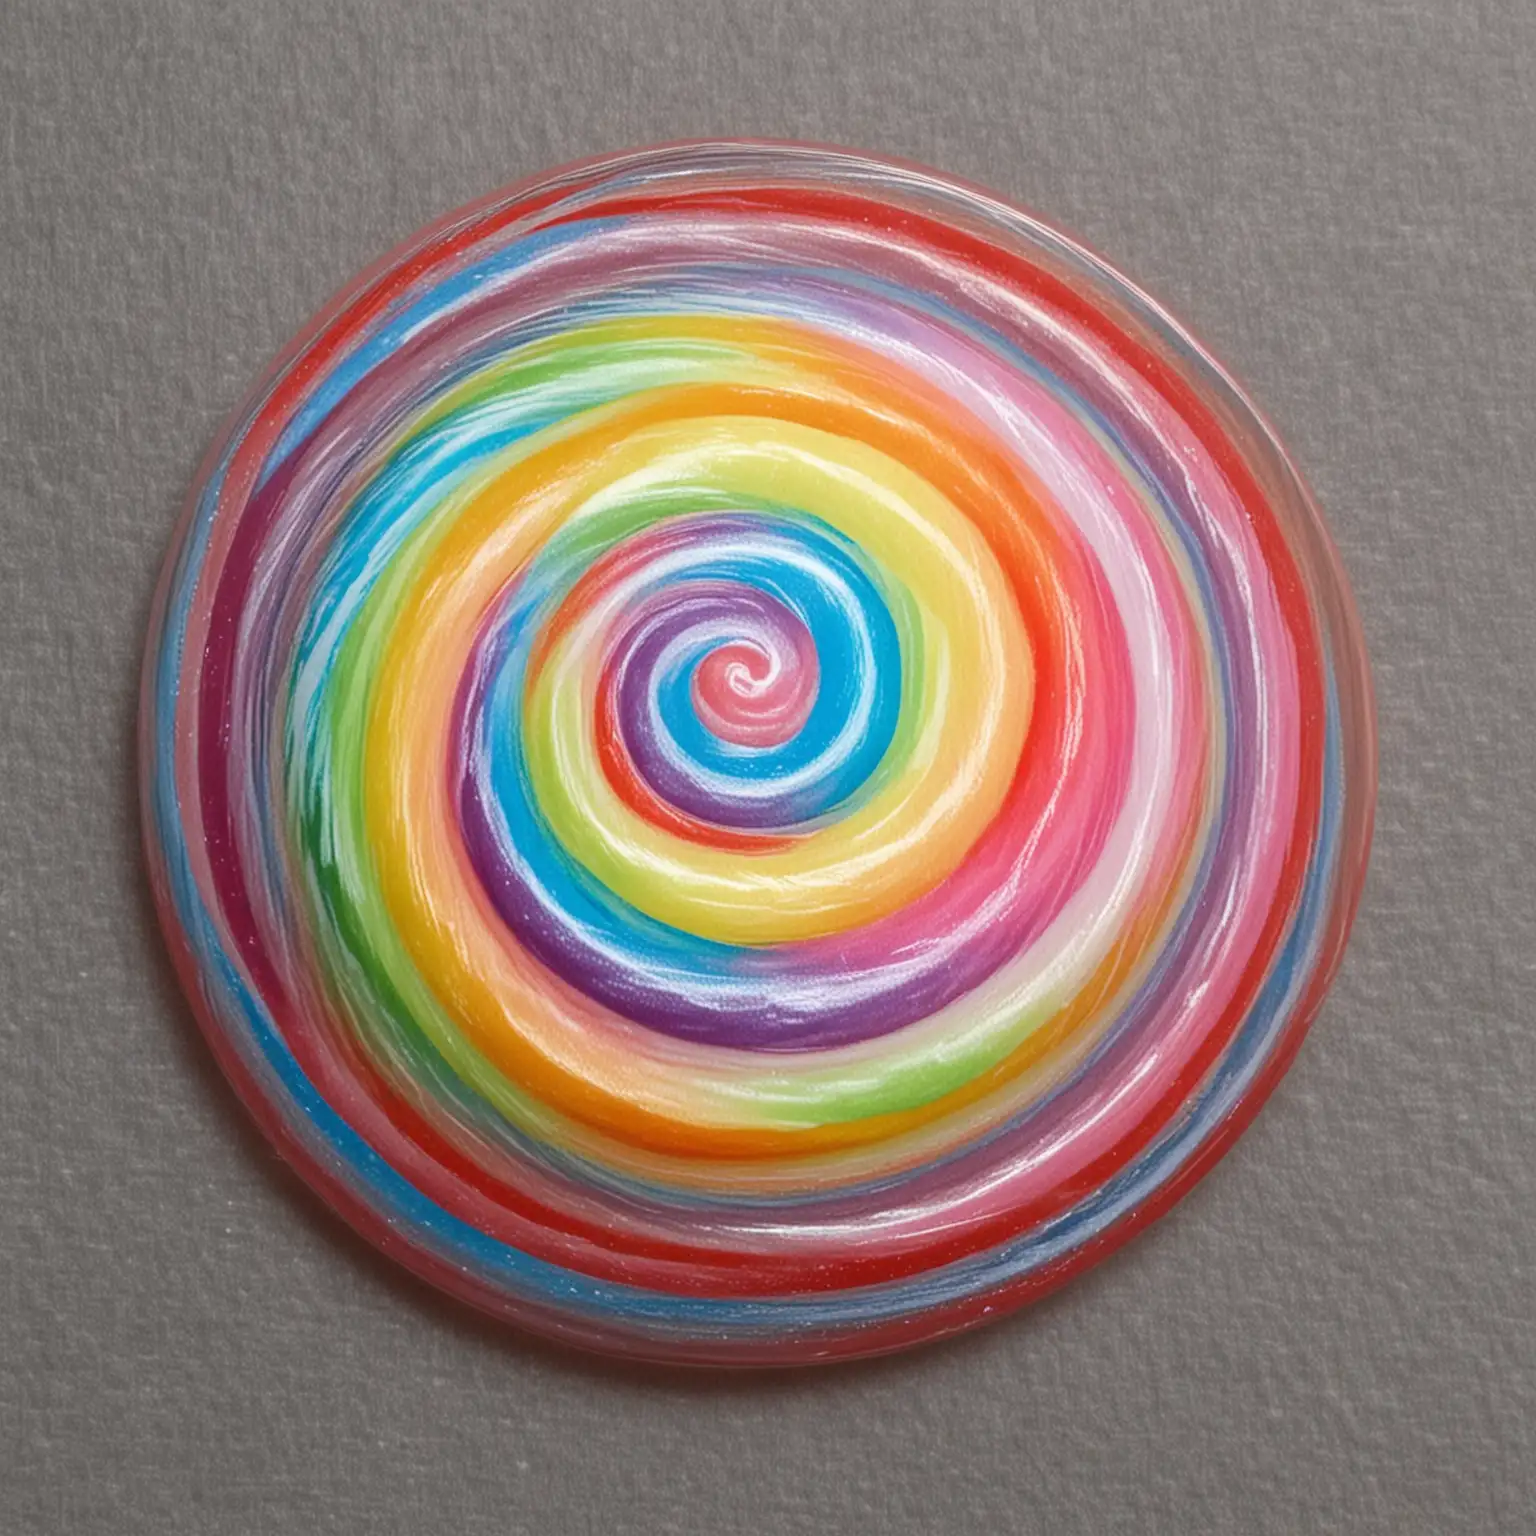 1 swirl candy with rainbow color and perfect angle

no gloss or reflection 

